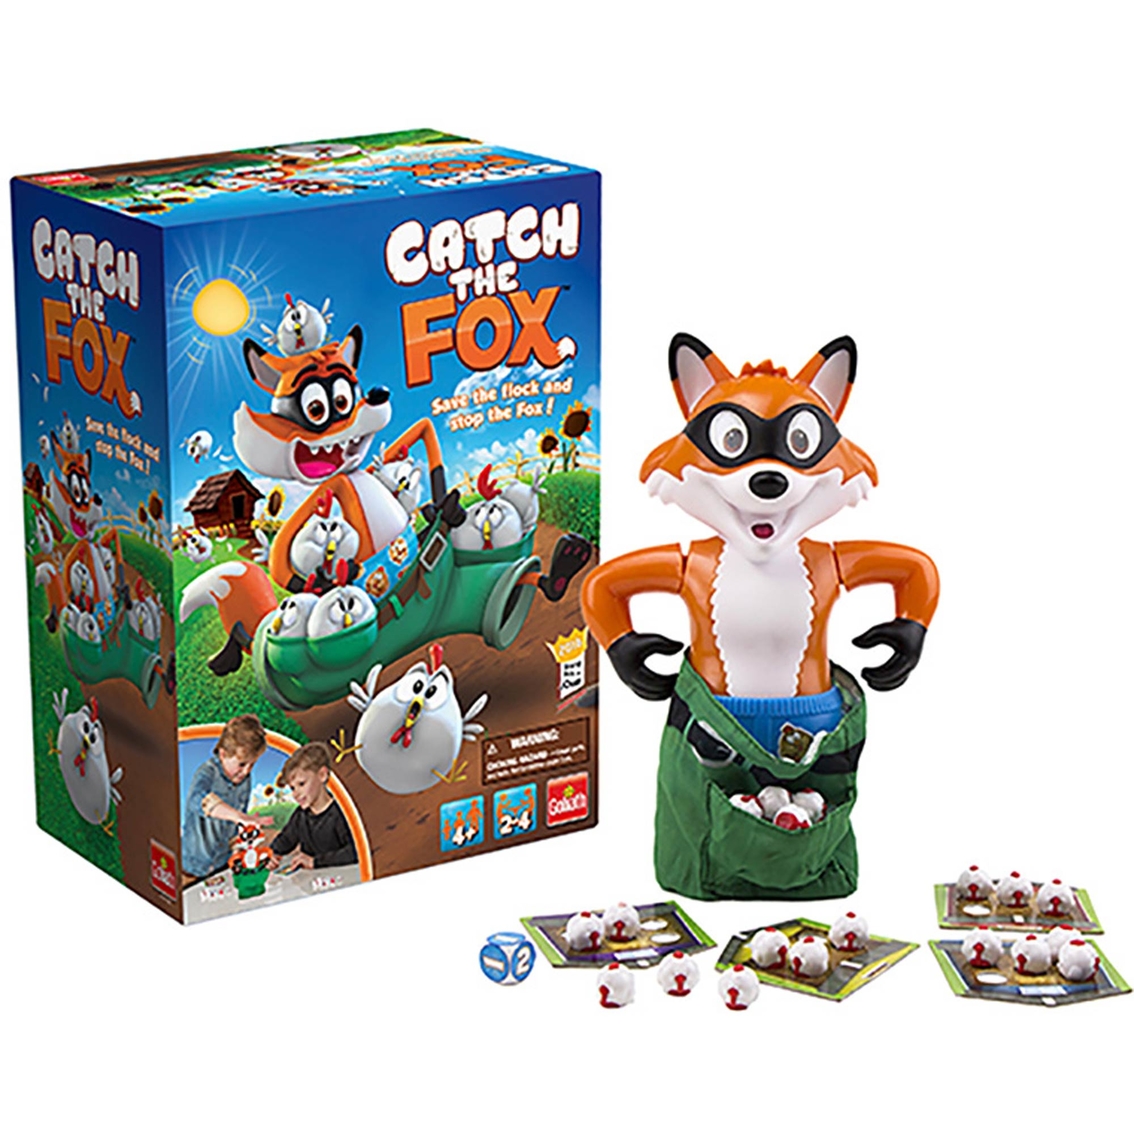 Goliath Games Catch the Fox - Image 1 of 2